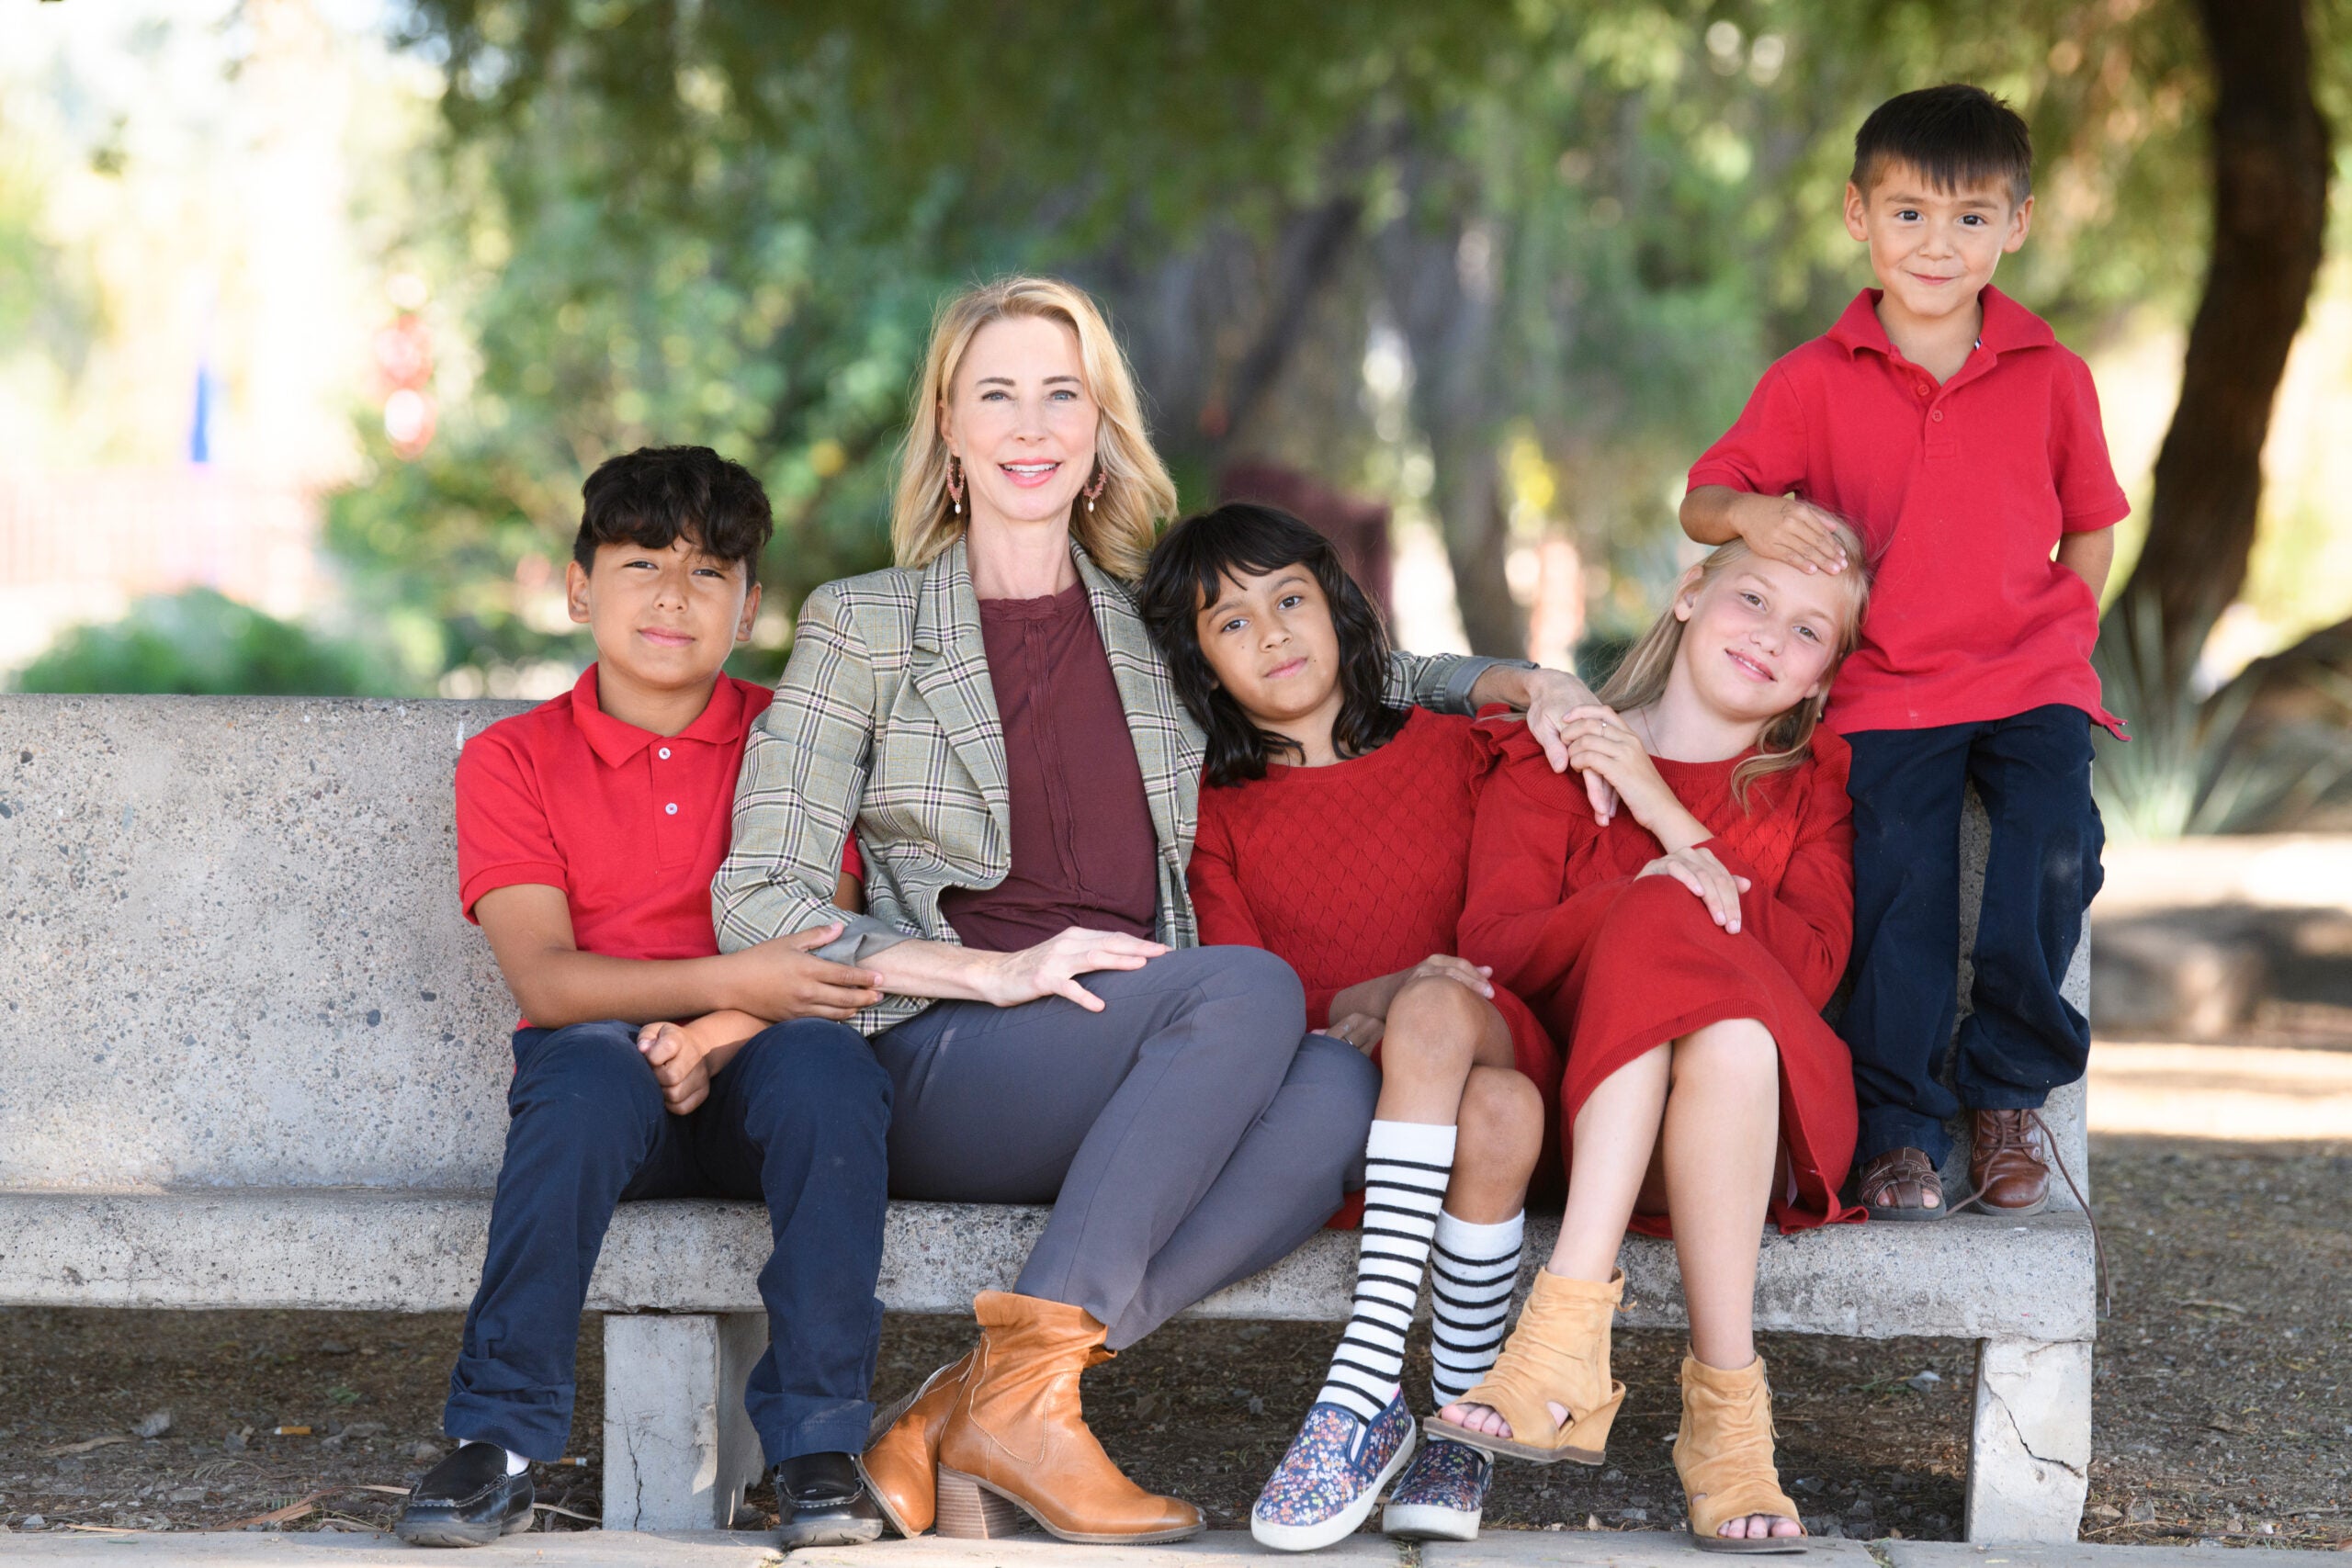 a woman sits on a bench with four children, all wearing red